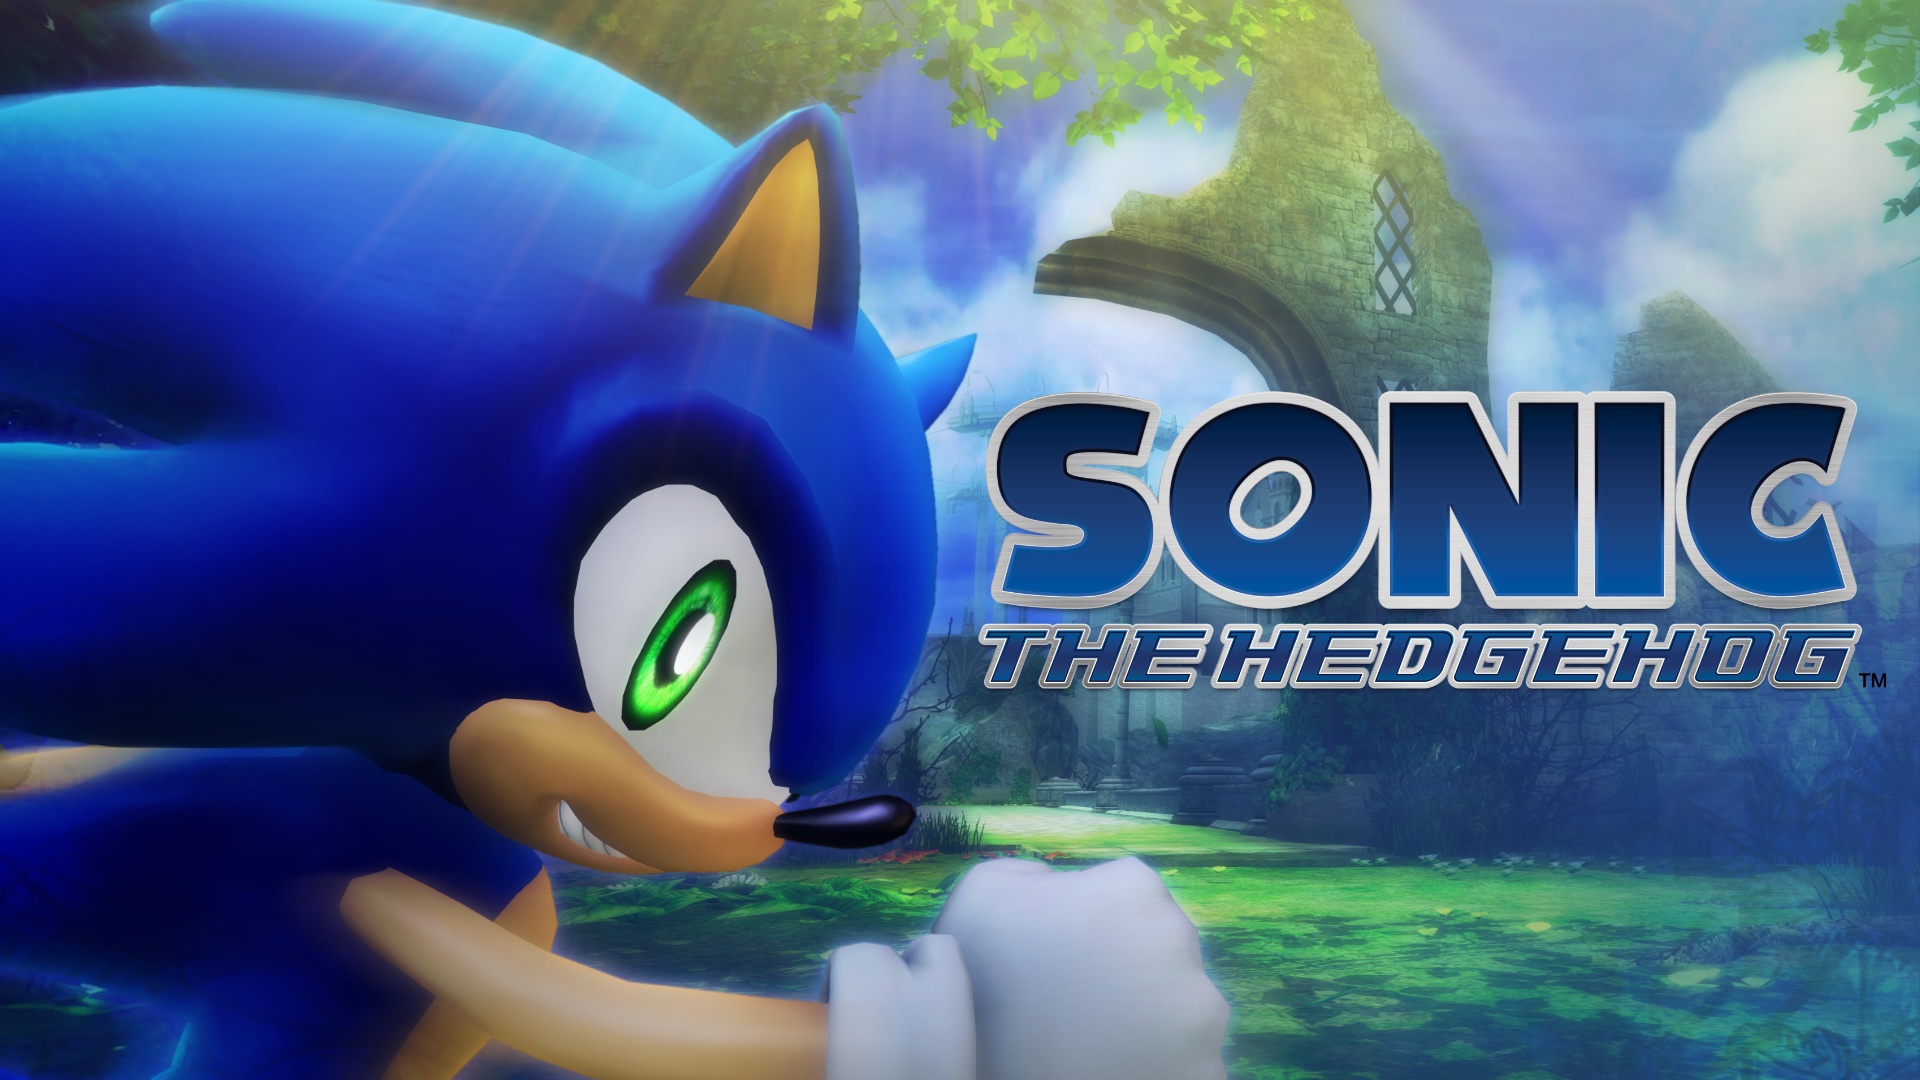 Download Sonic P-06